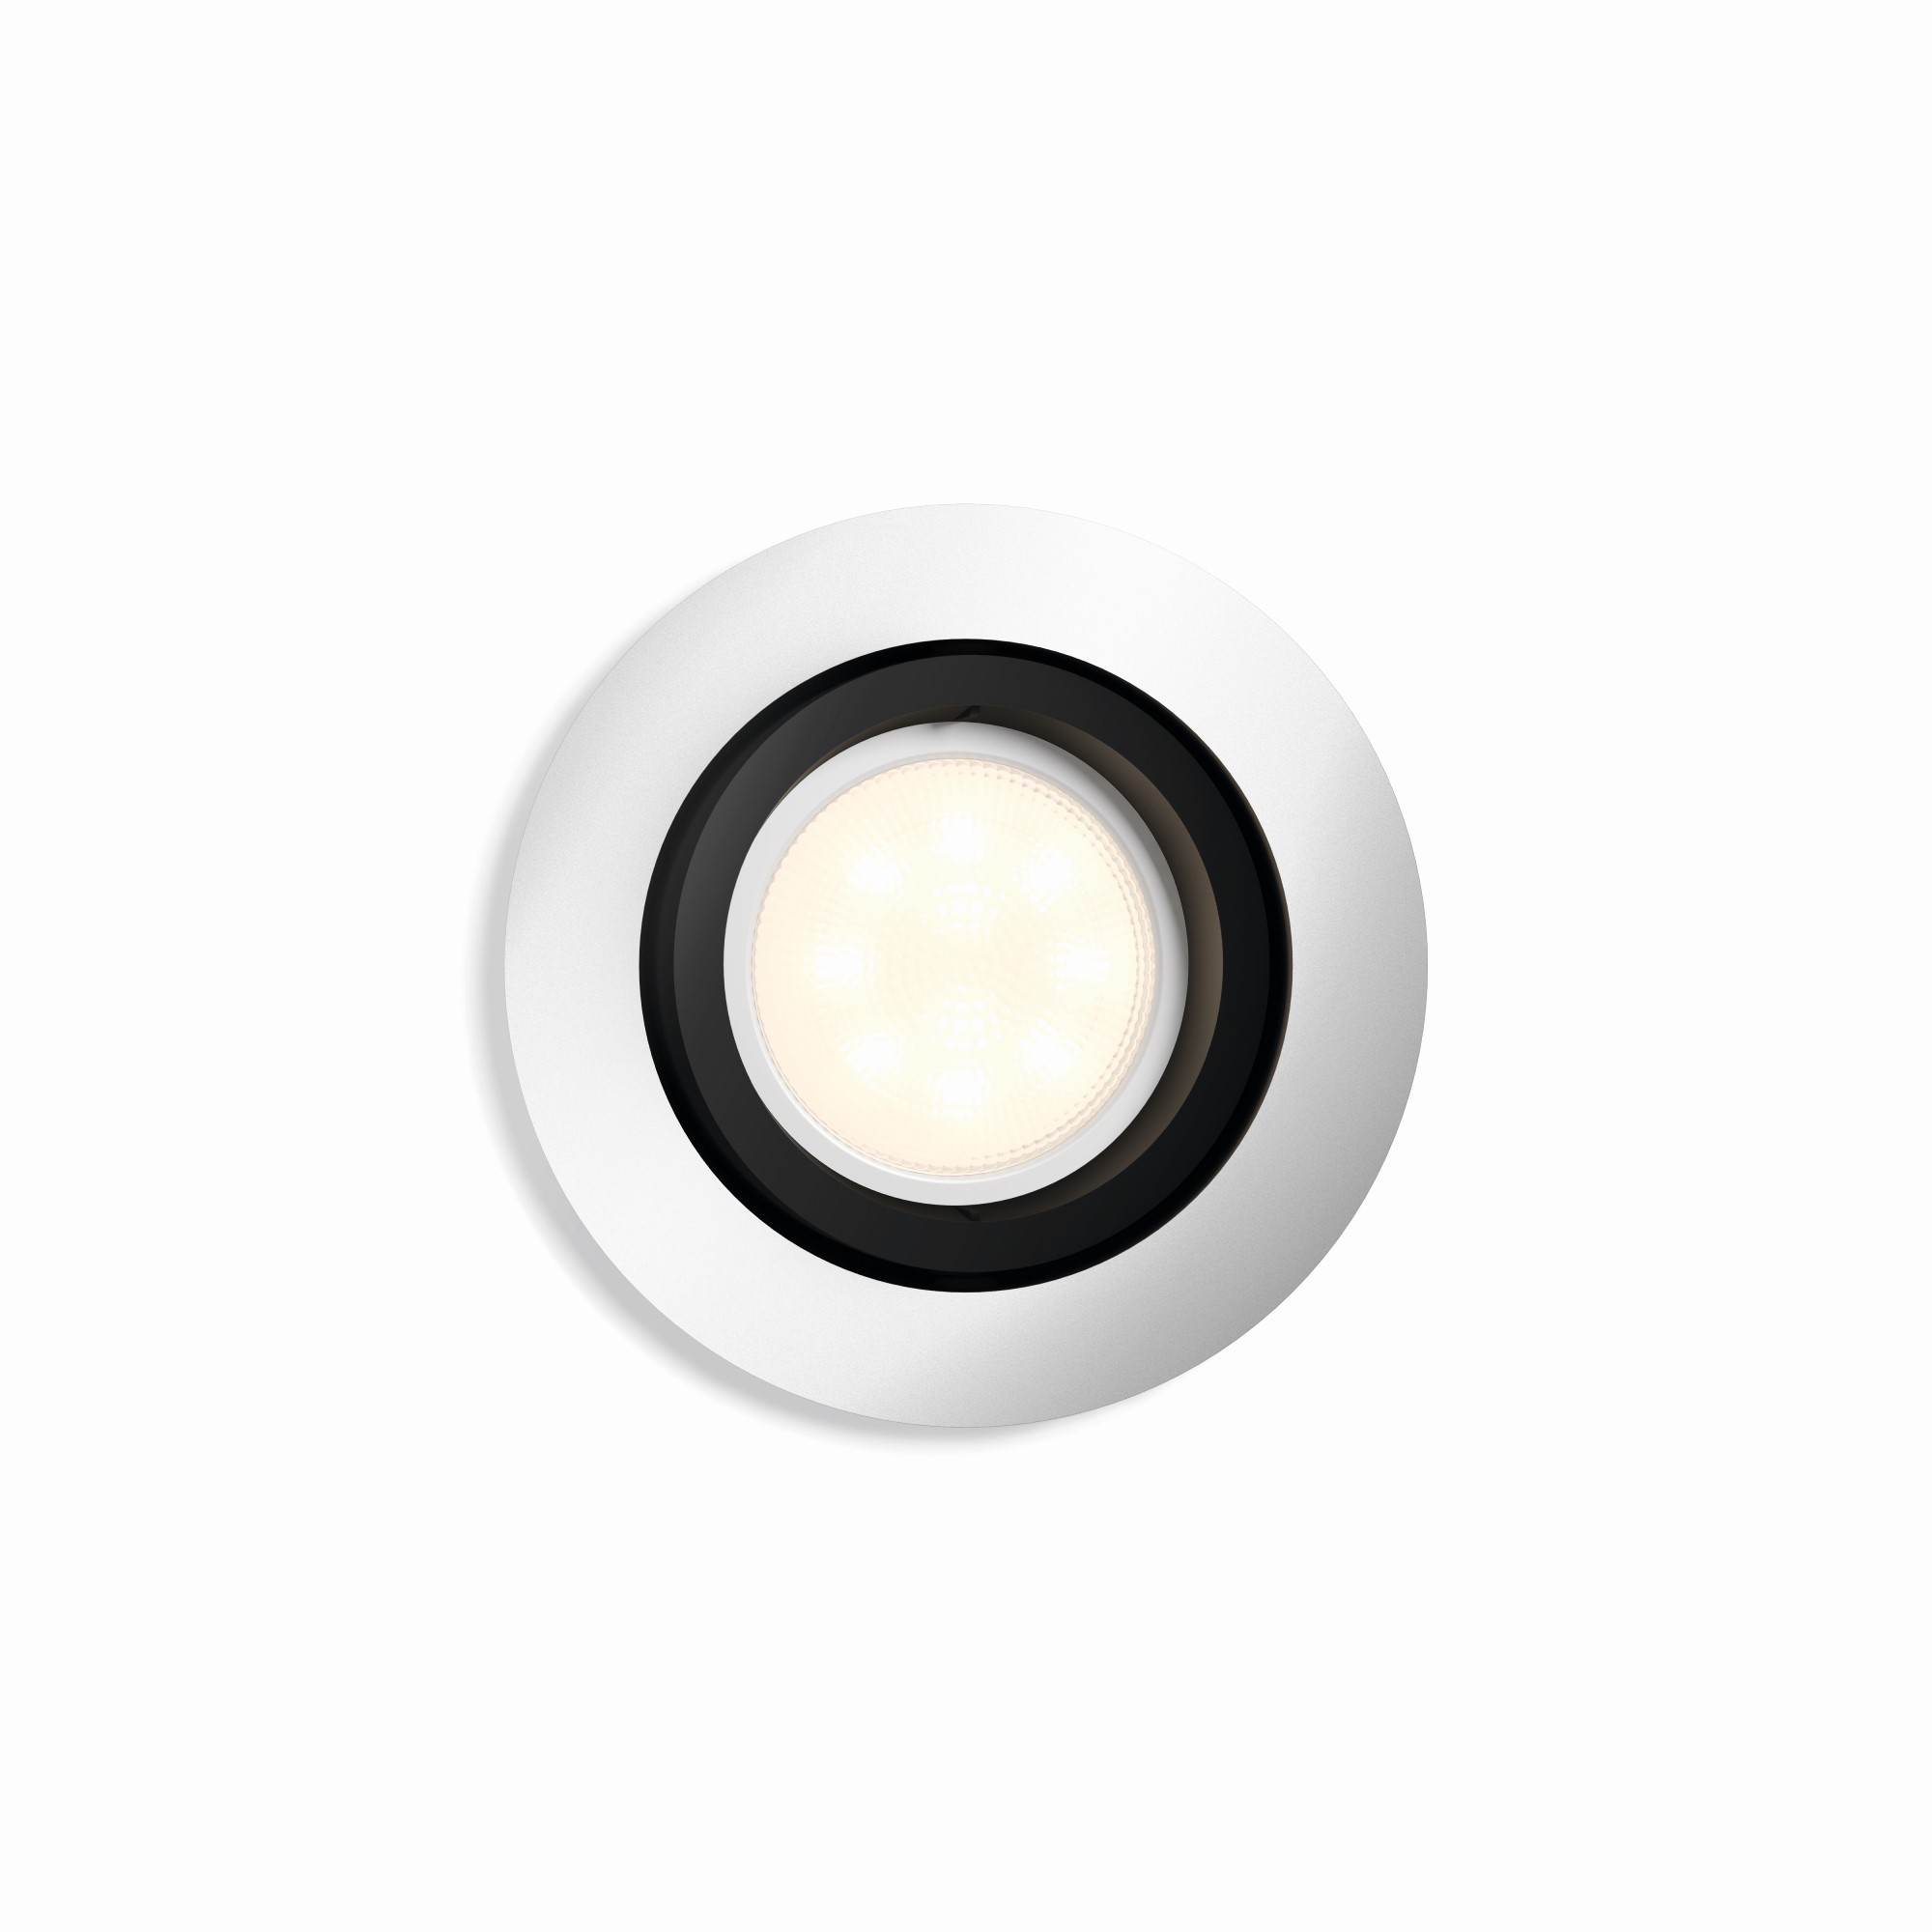 Philips Hue White Ambiance Milliskin LED Downlight round, silver, 250lm, with Dimmer Switch